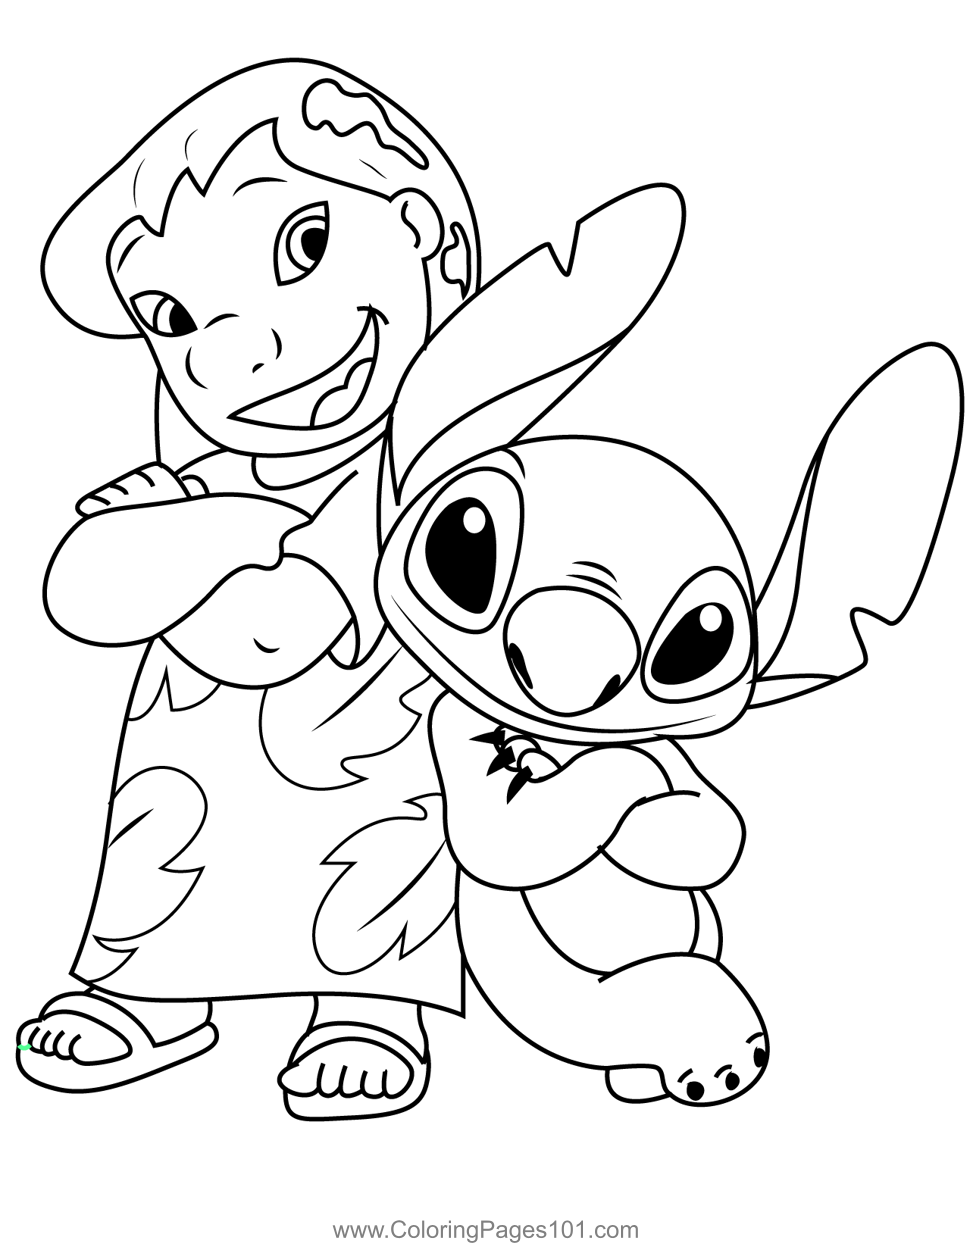 Stand Lilo And Stitch Coloring Page for Kids - Free Lilo & Stitch ...